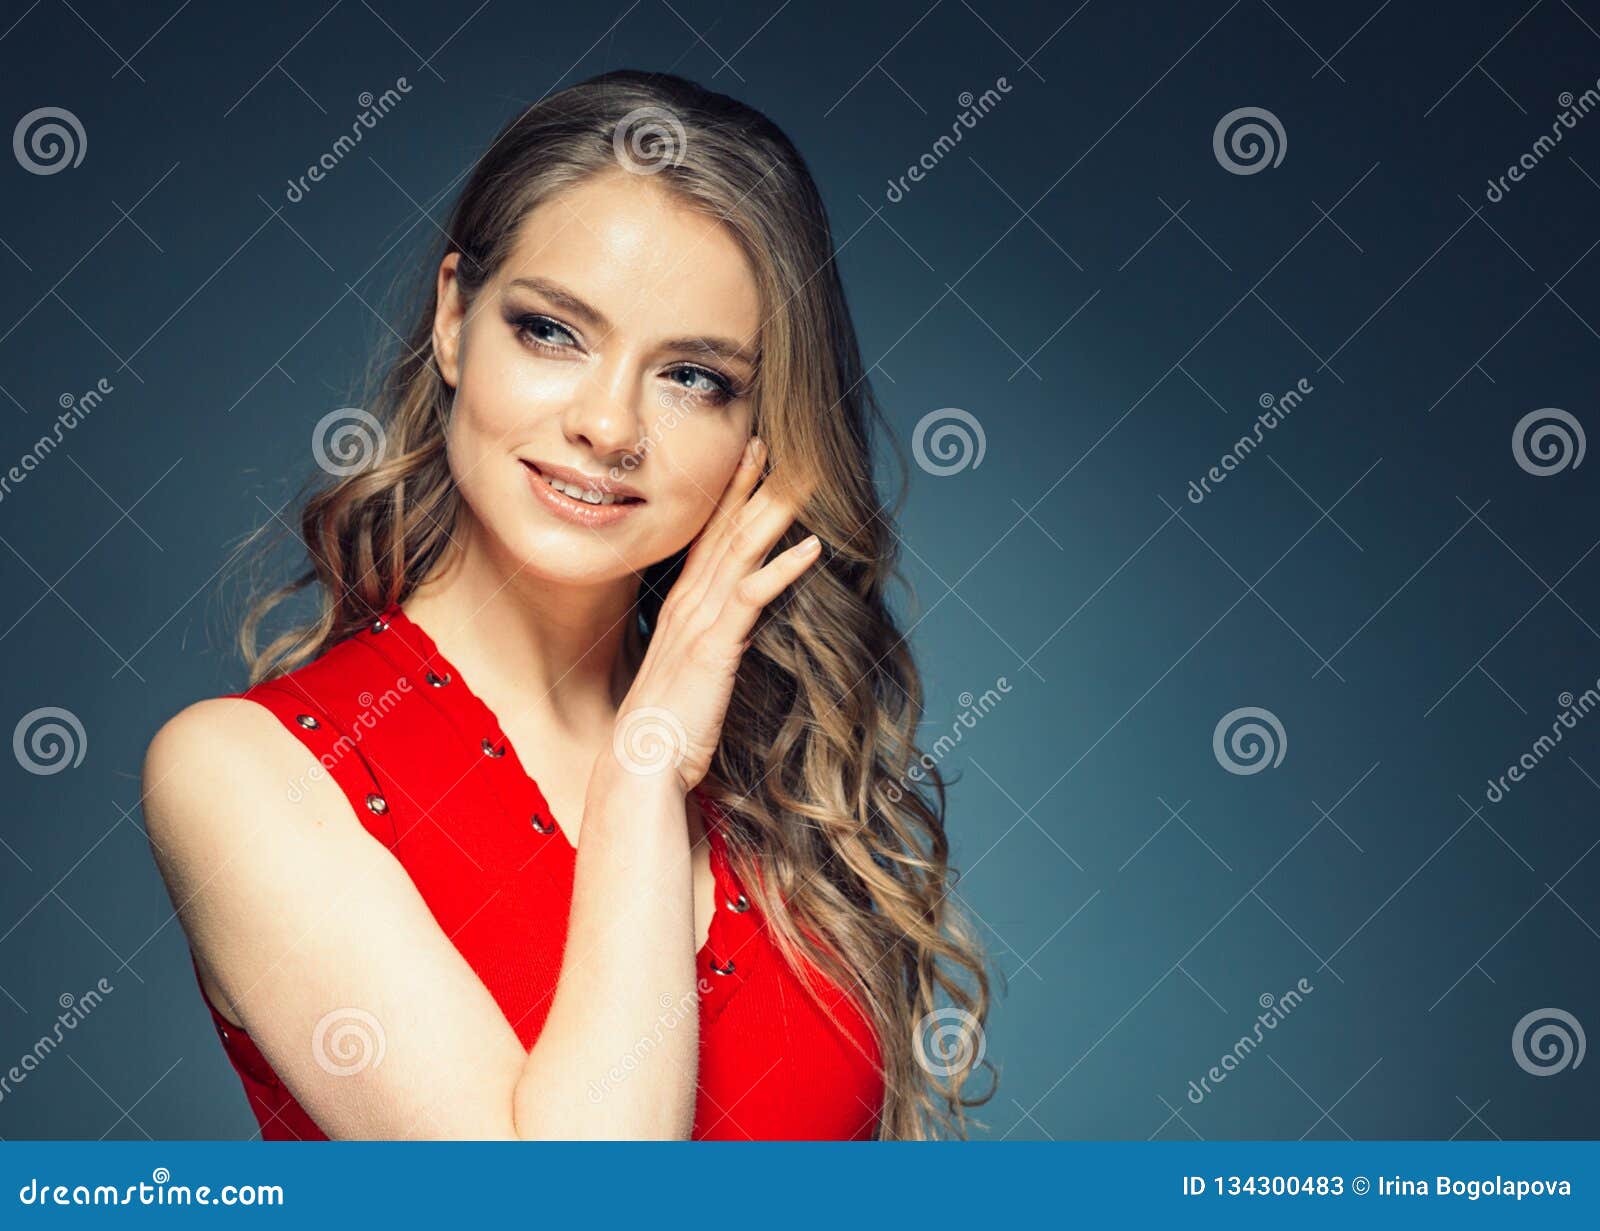 Woman in Red Dress with Long Blonde Hair Stock Image - Image of elegant ...